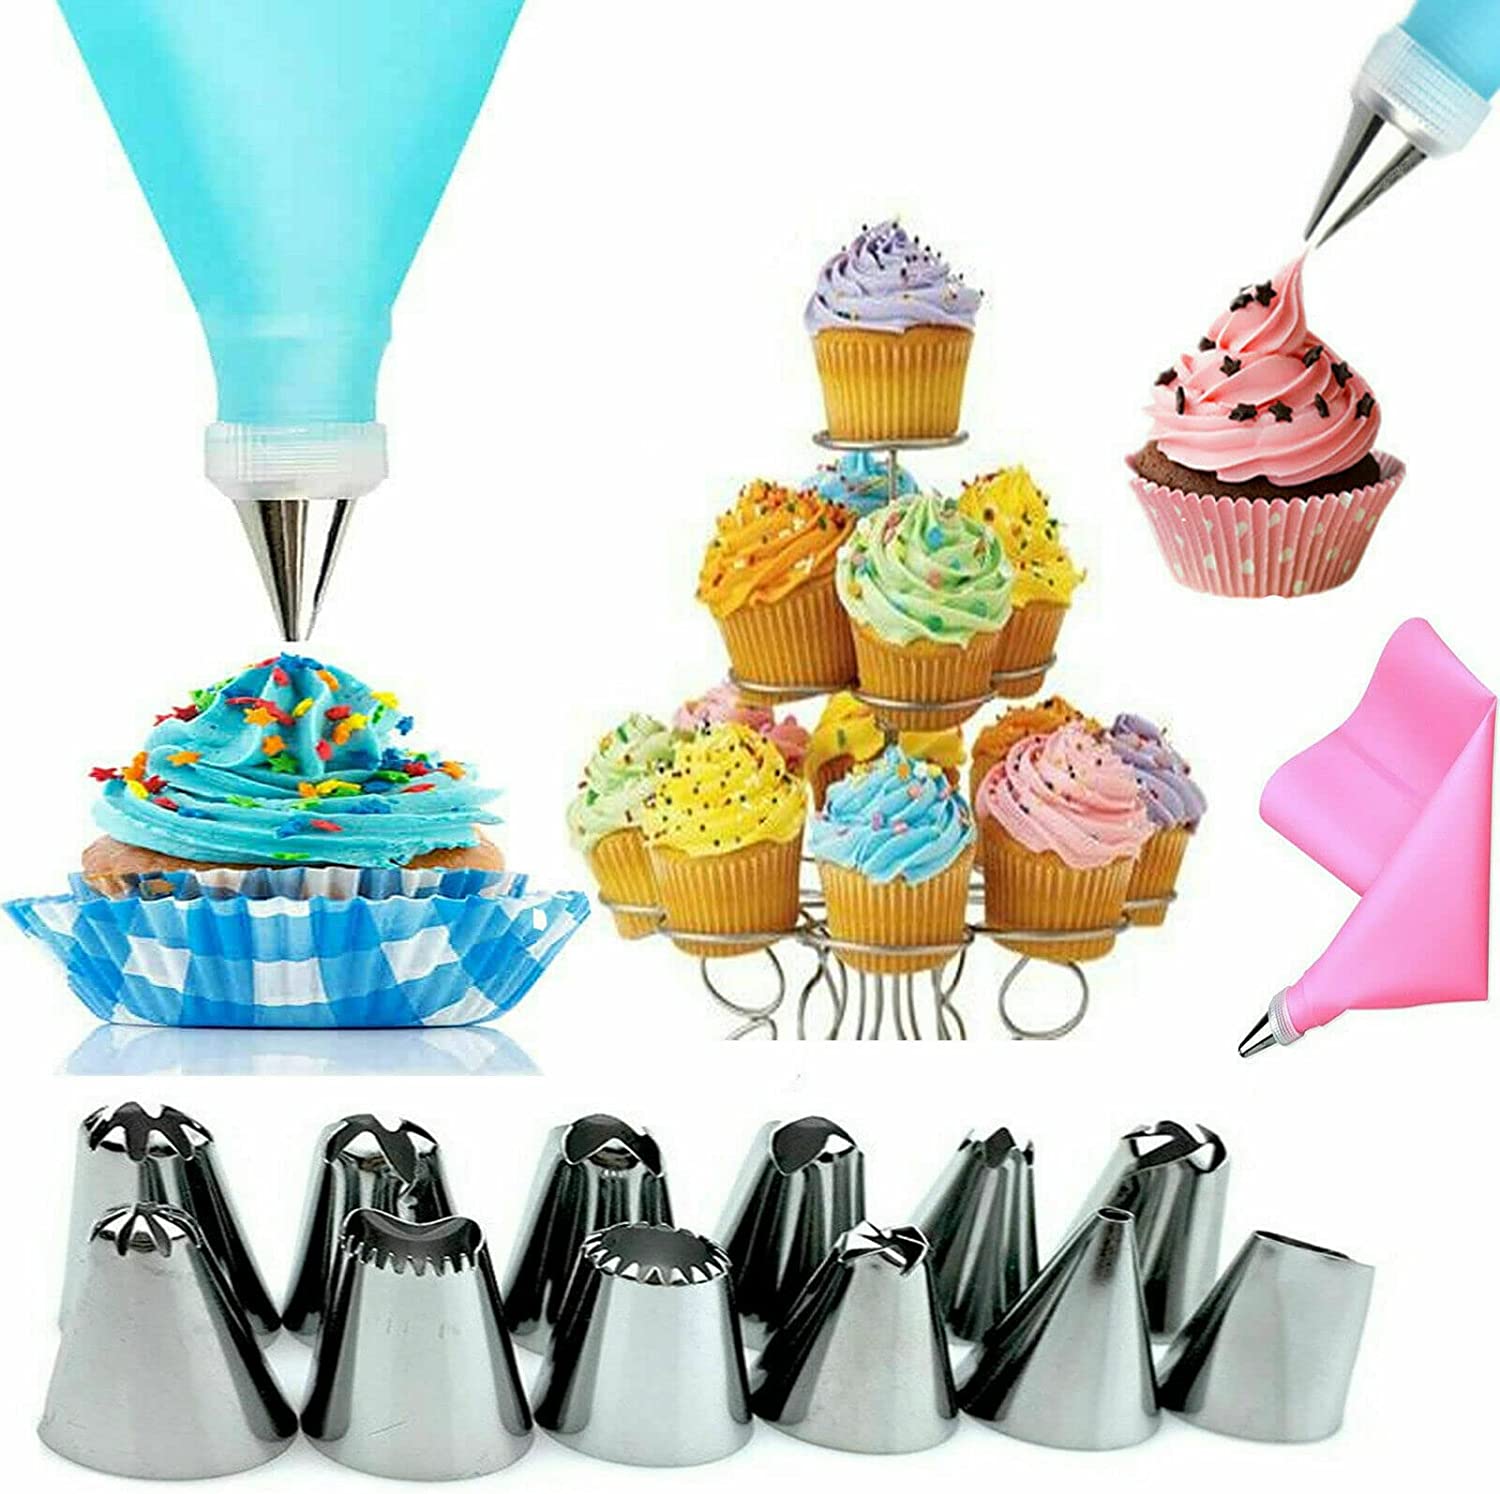 Ousuga 14 Pieces cake Piping Nozzle Set, Reusable Stainless Steel Russian  Nozzles and Silicone Icing Bag cream Piping Nozzle Pastry cre